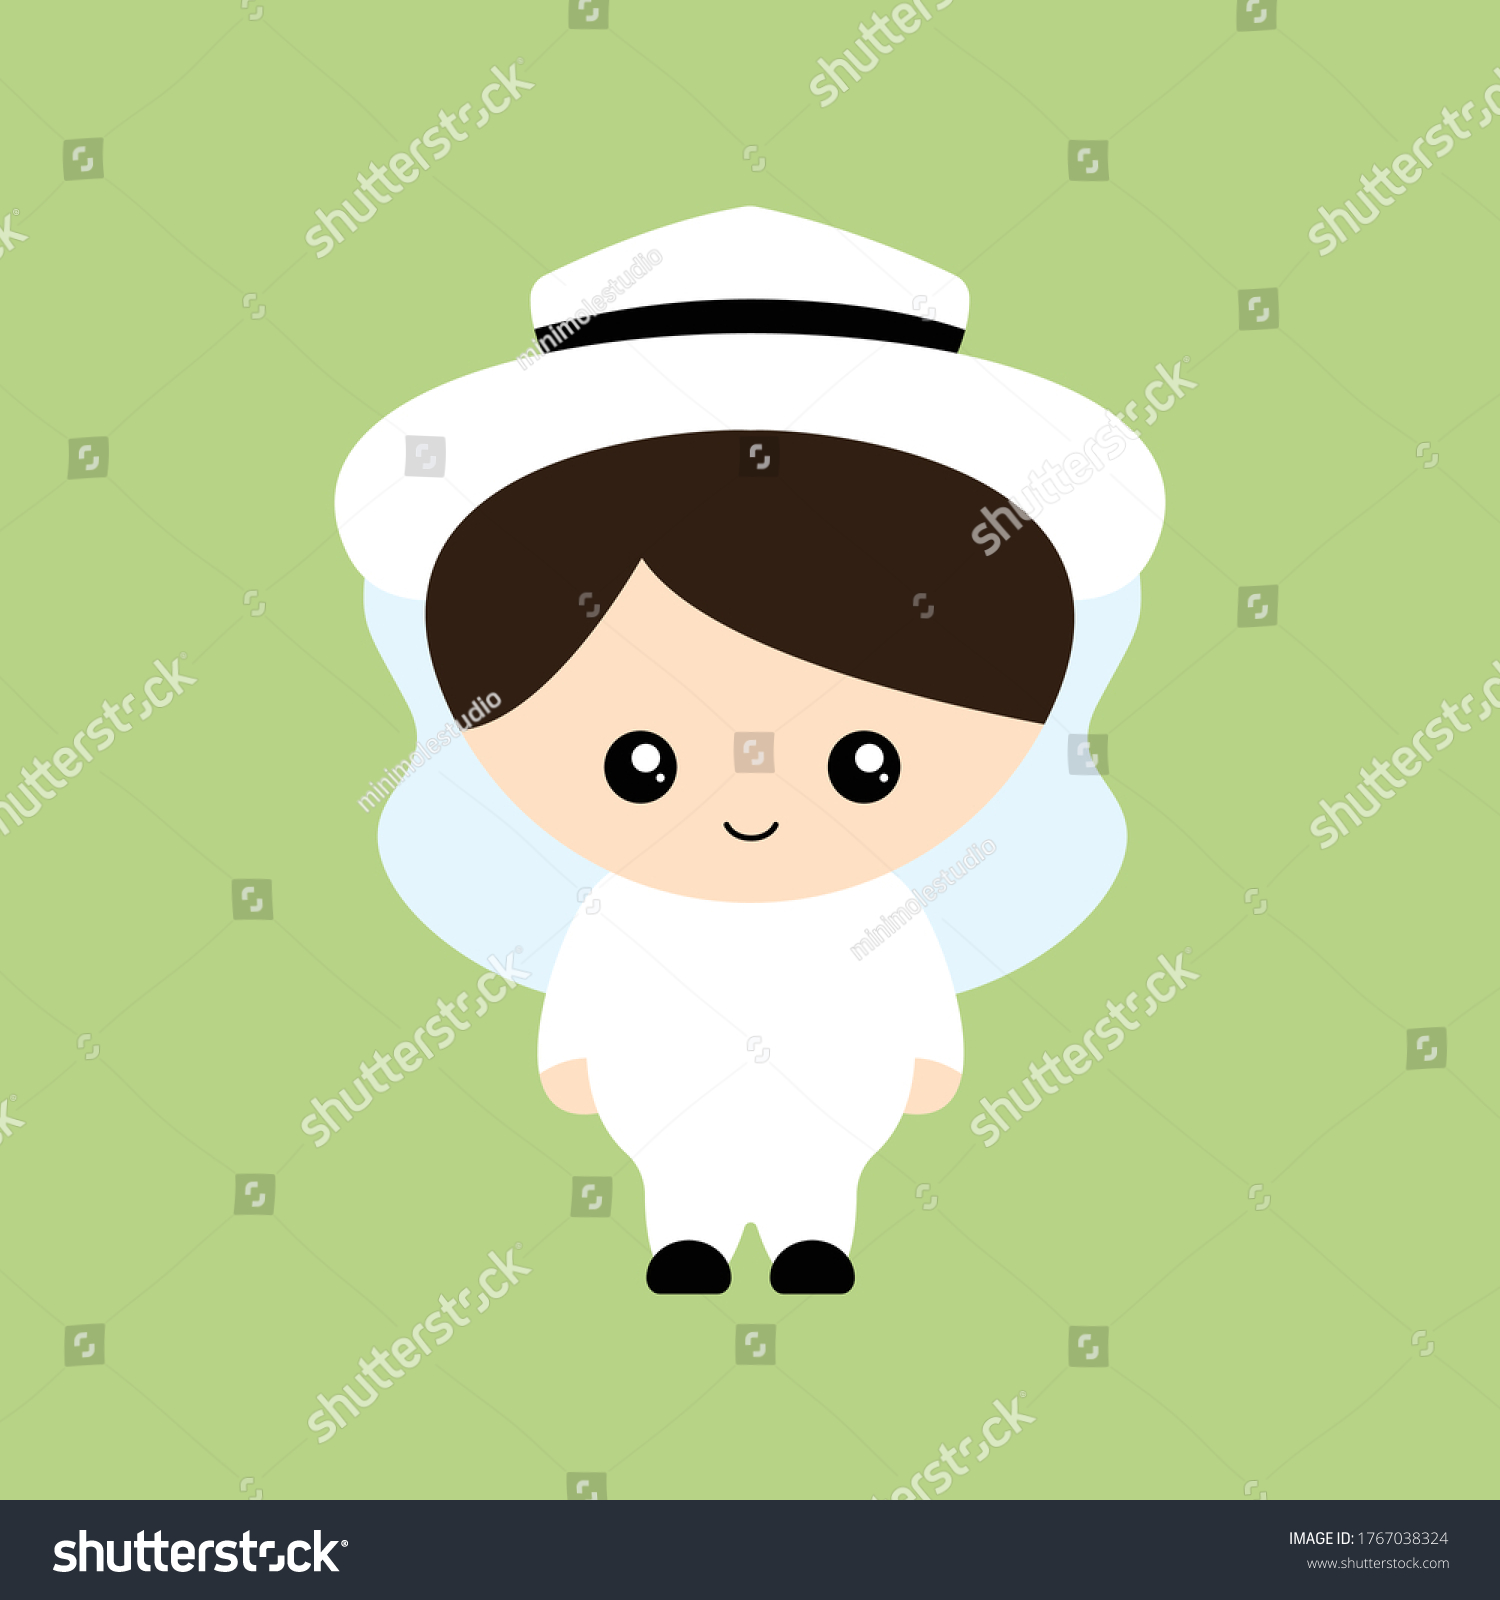 SVG of Vector illustration of a beekeeper. Simple flat style. svg